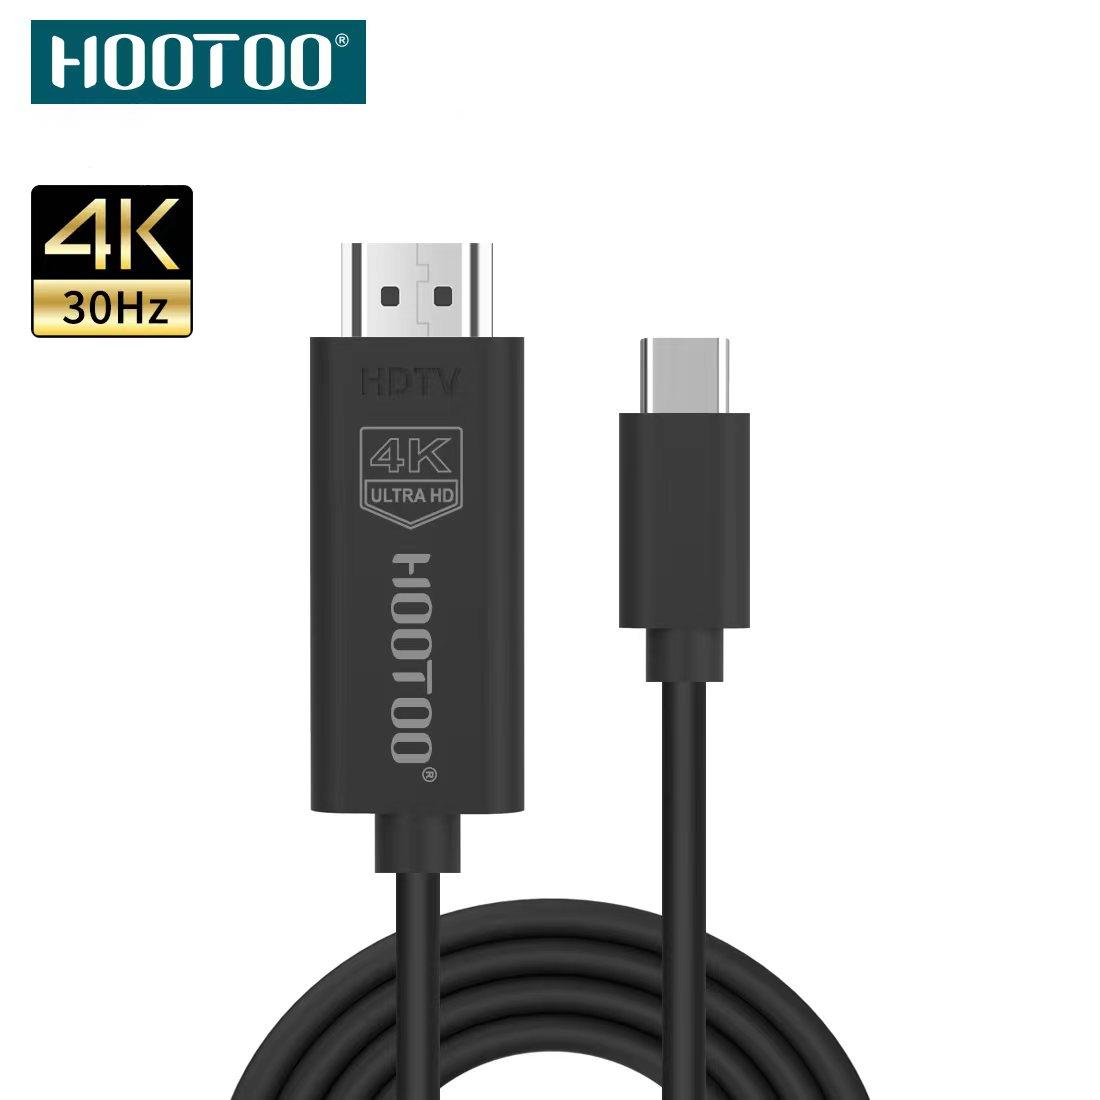 CABLE HT-079